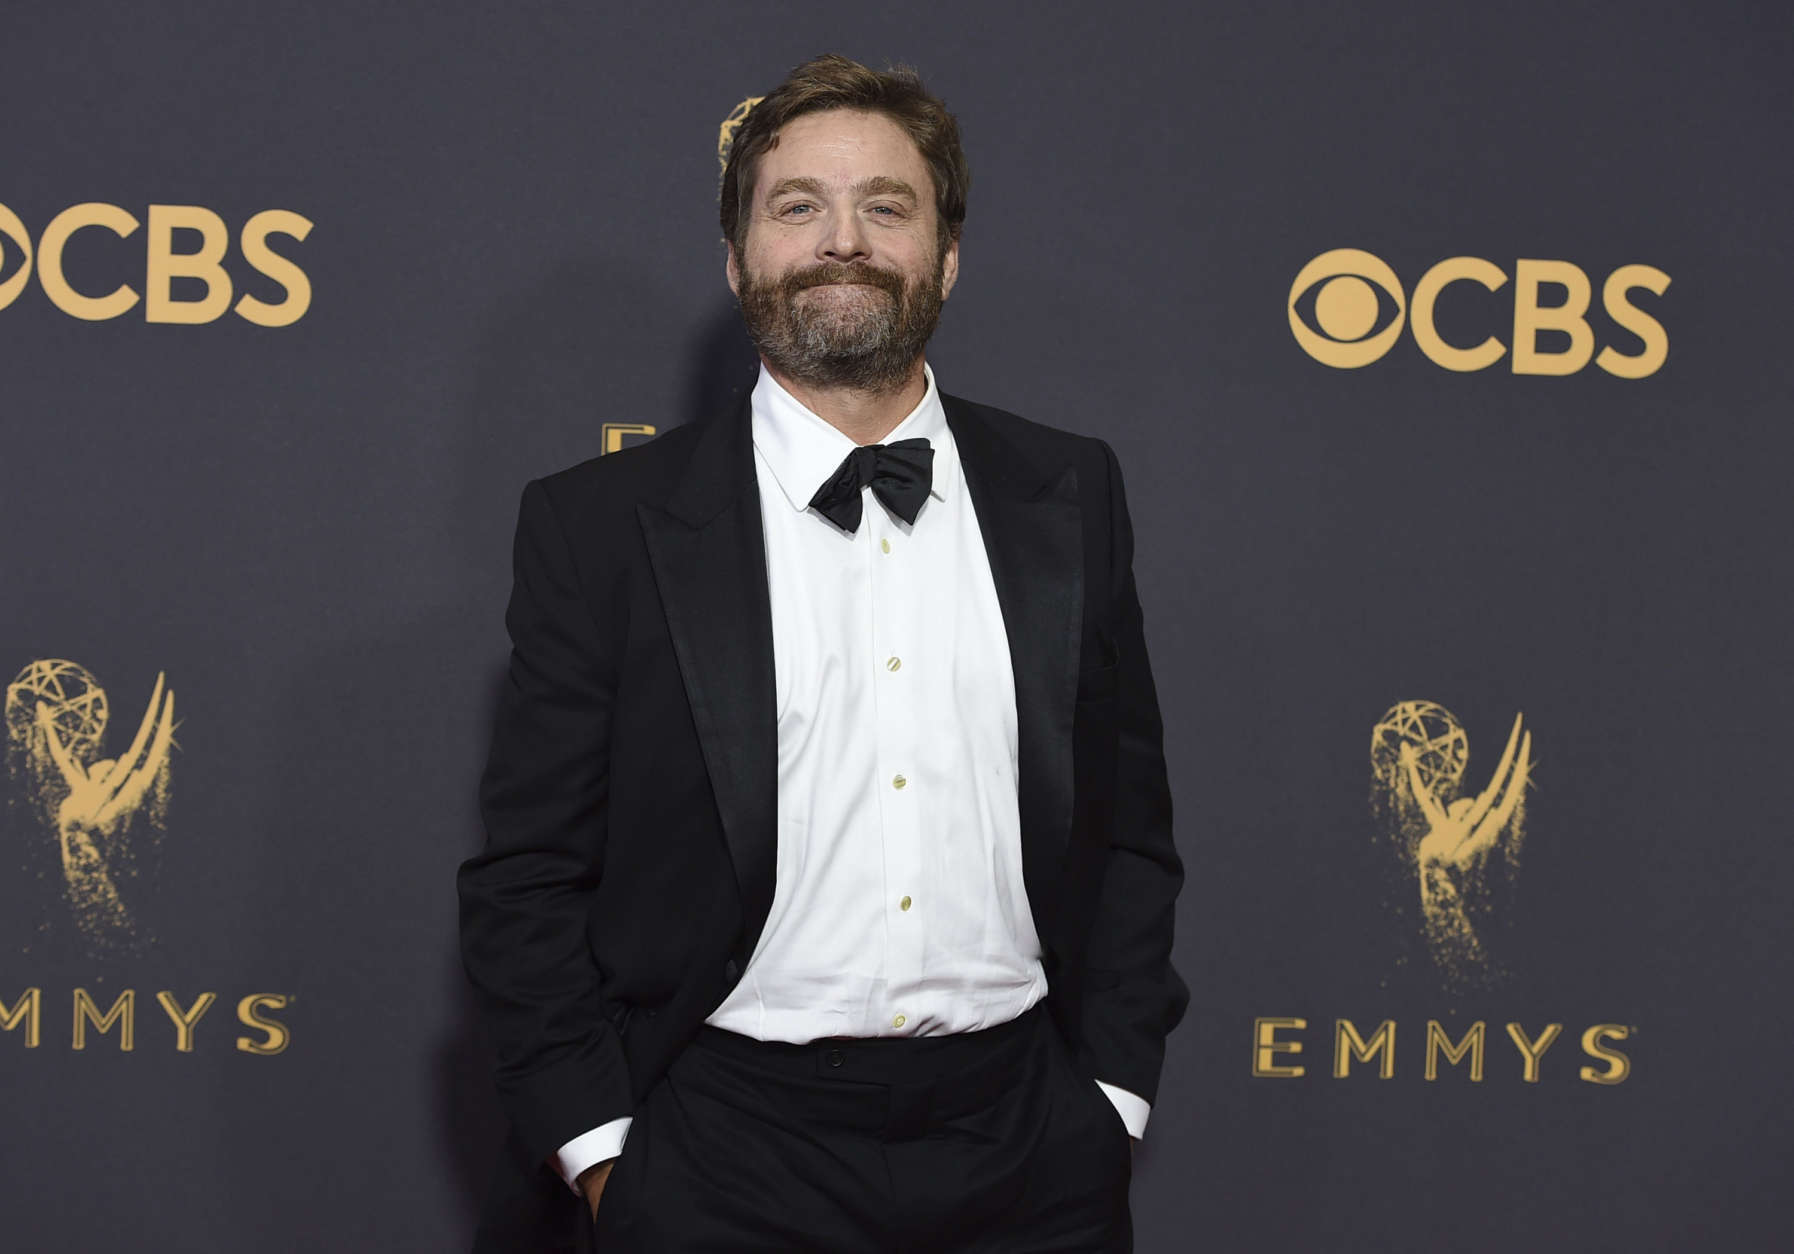 Zach Galifianakis arrives at the 69th Primetime Emmy Awards on Sunday, Sept. 17, 2017, at the Microsoft Theater in Los Angeles. (Photo by Jordan Strauss/Invision/AP)